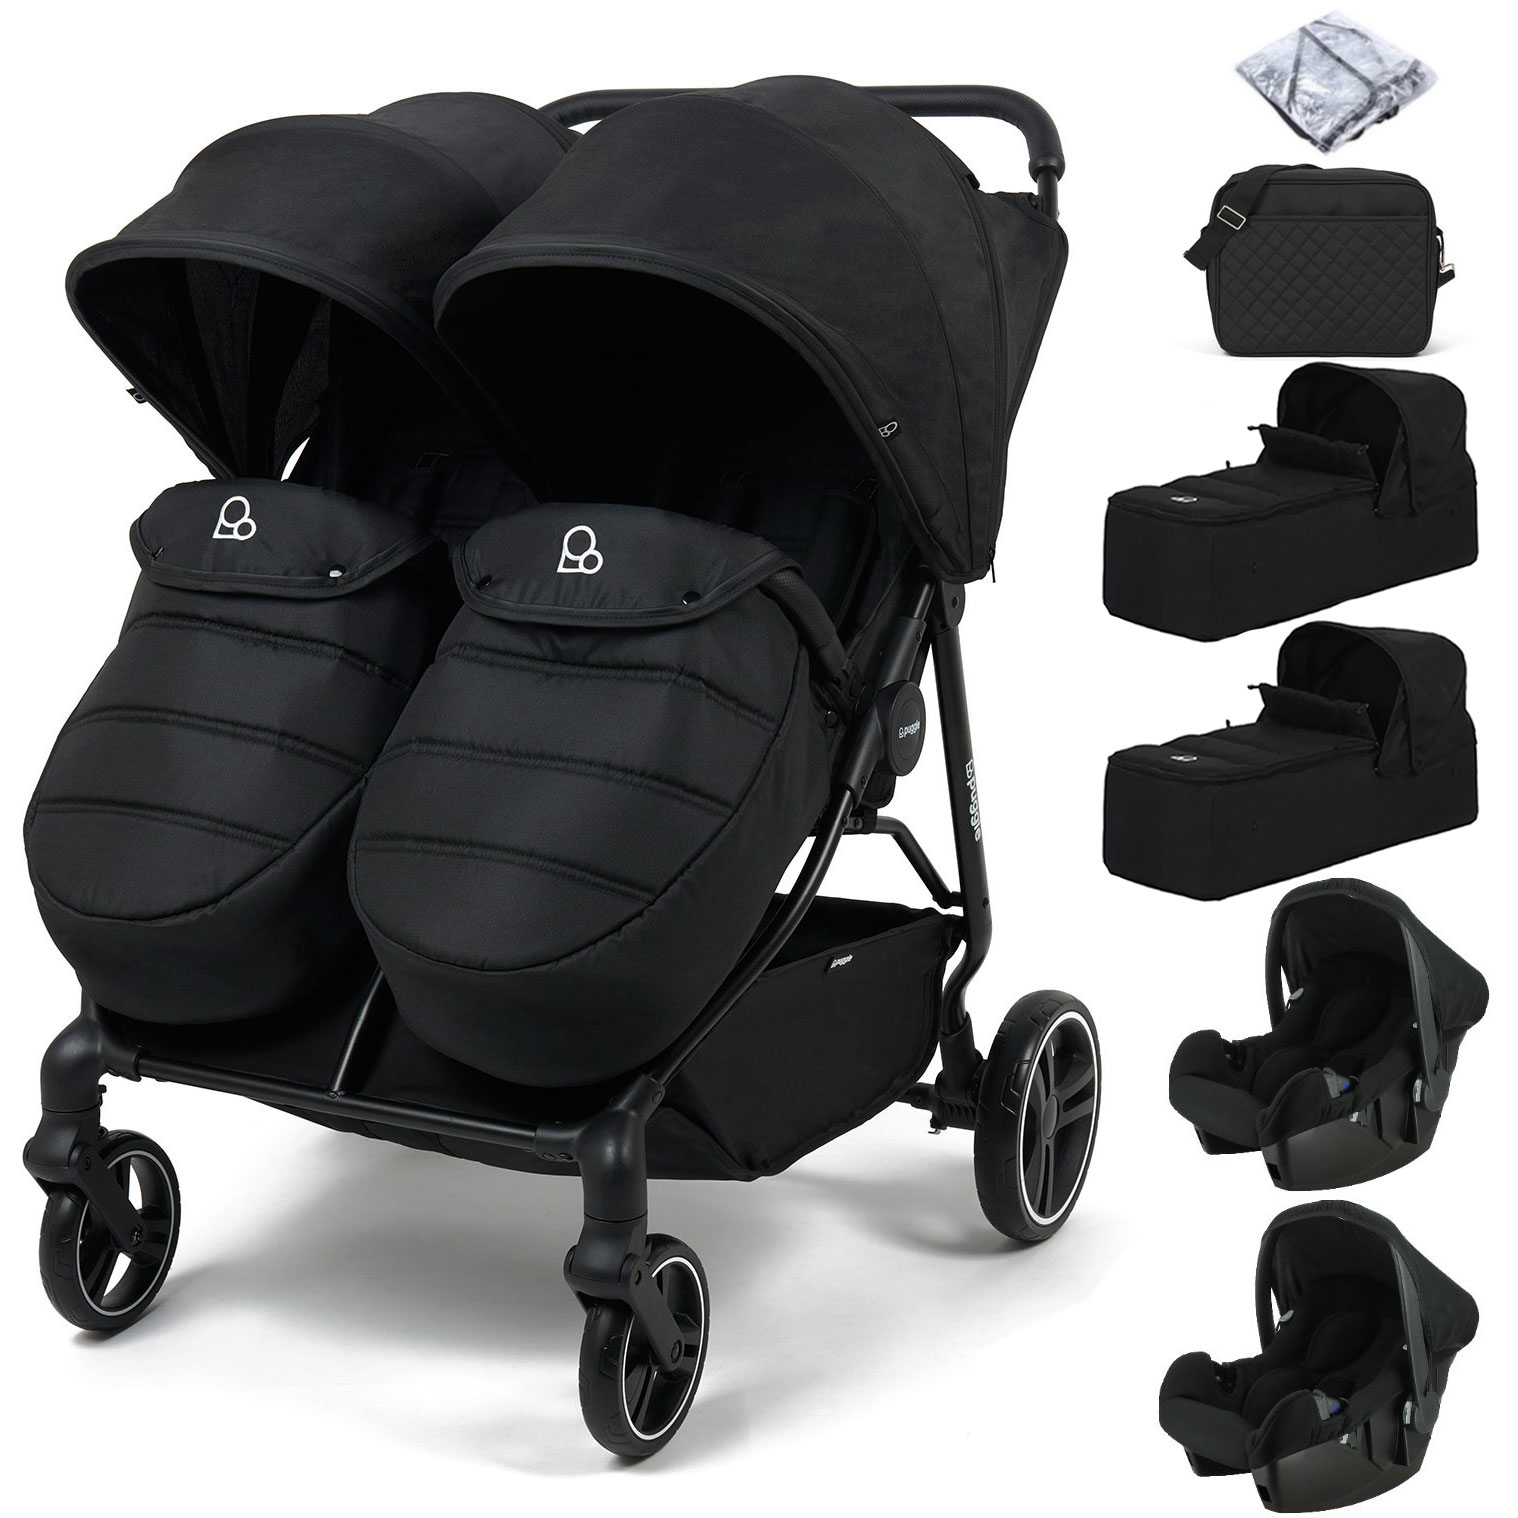 Puggle Urban City Easyfold Twin Pushchair with Footmuffs, 2 Beone Car Seats, 2 Soft Carrycots & Changing Bag - Storm Black